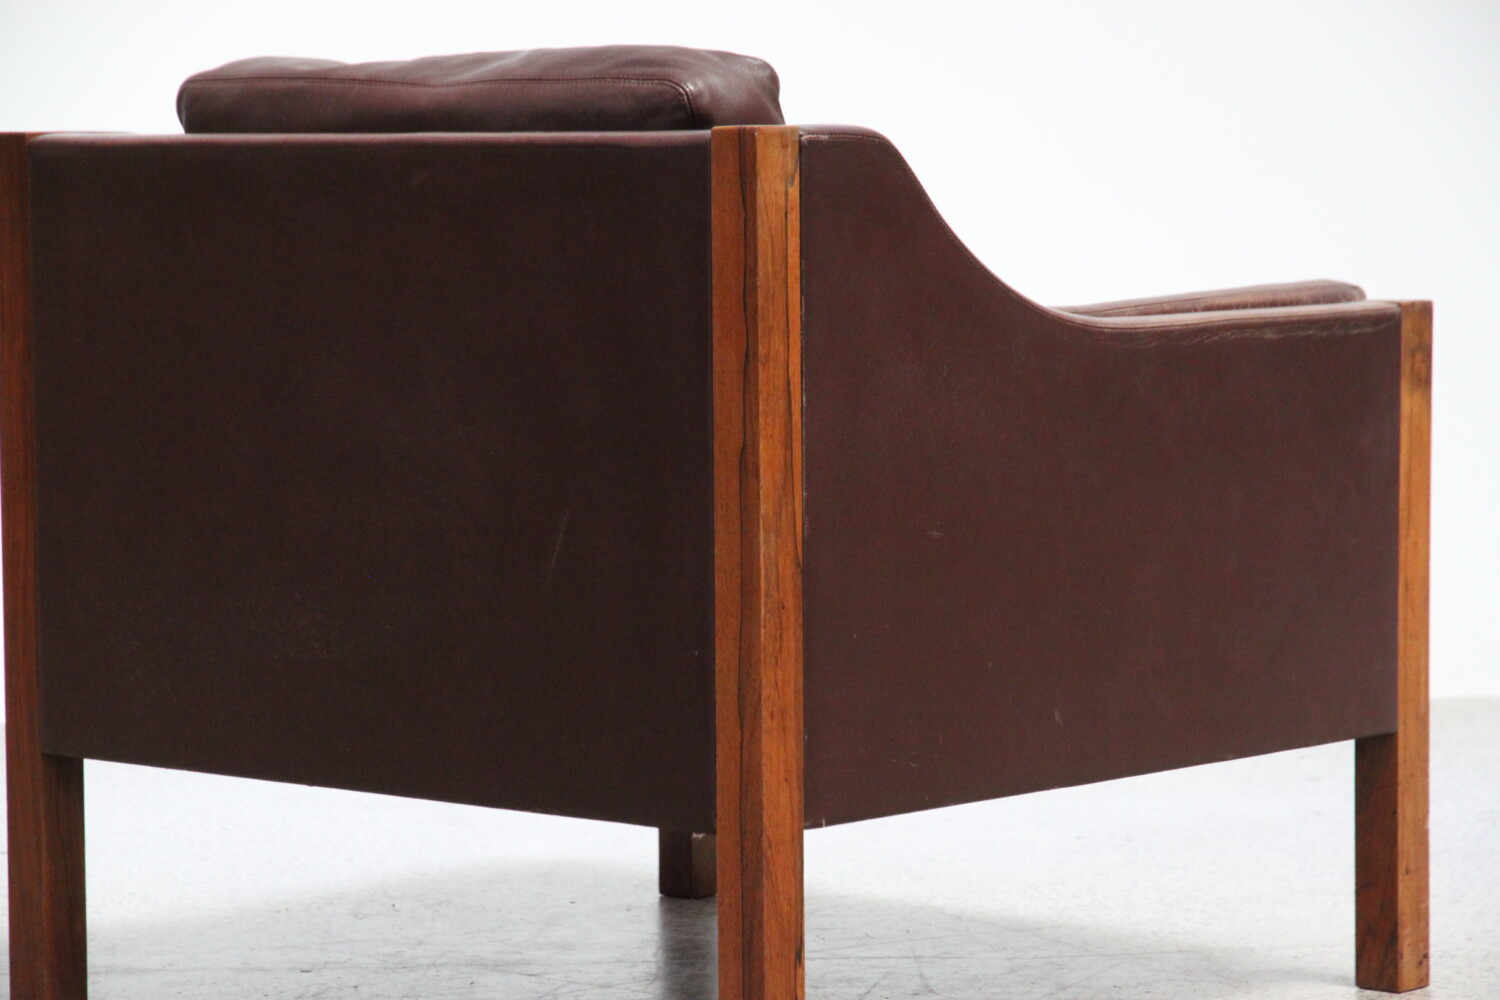 Leather & Rosewood Chair by Poul Volther